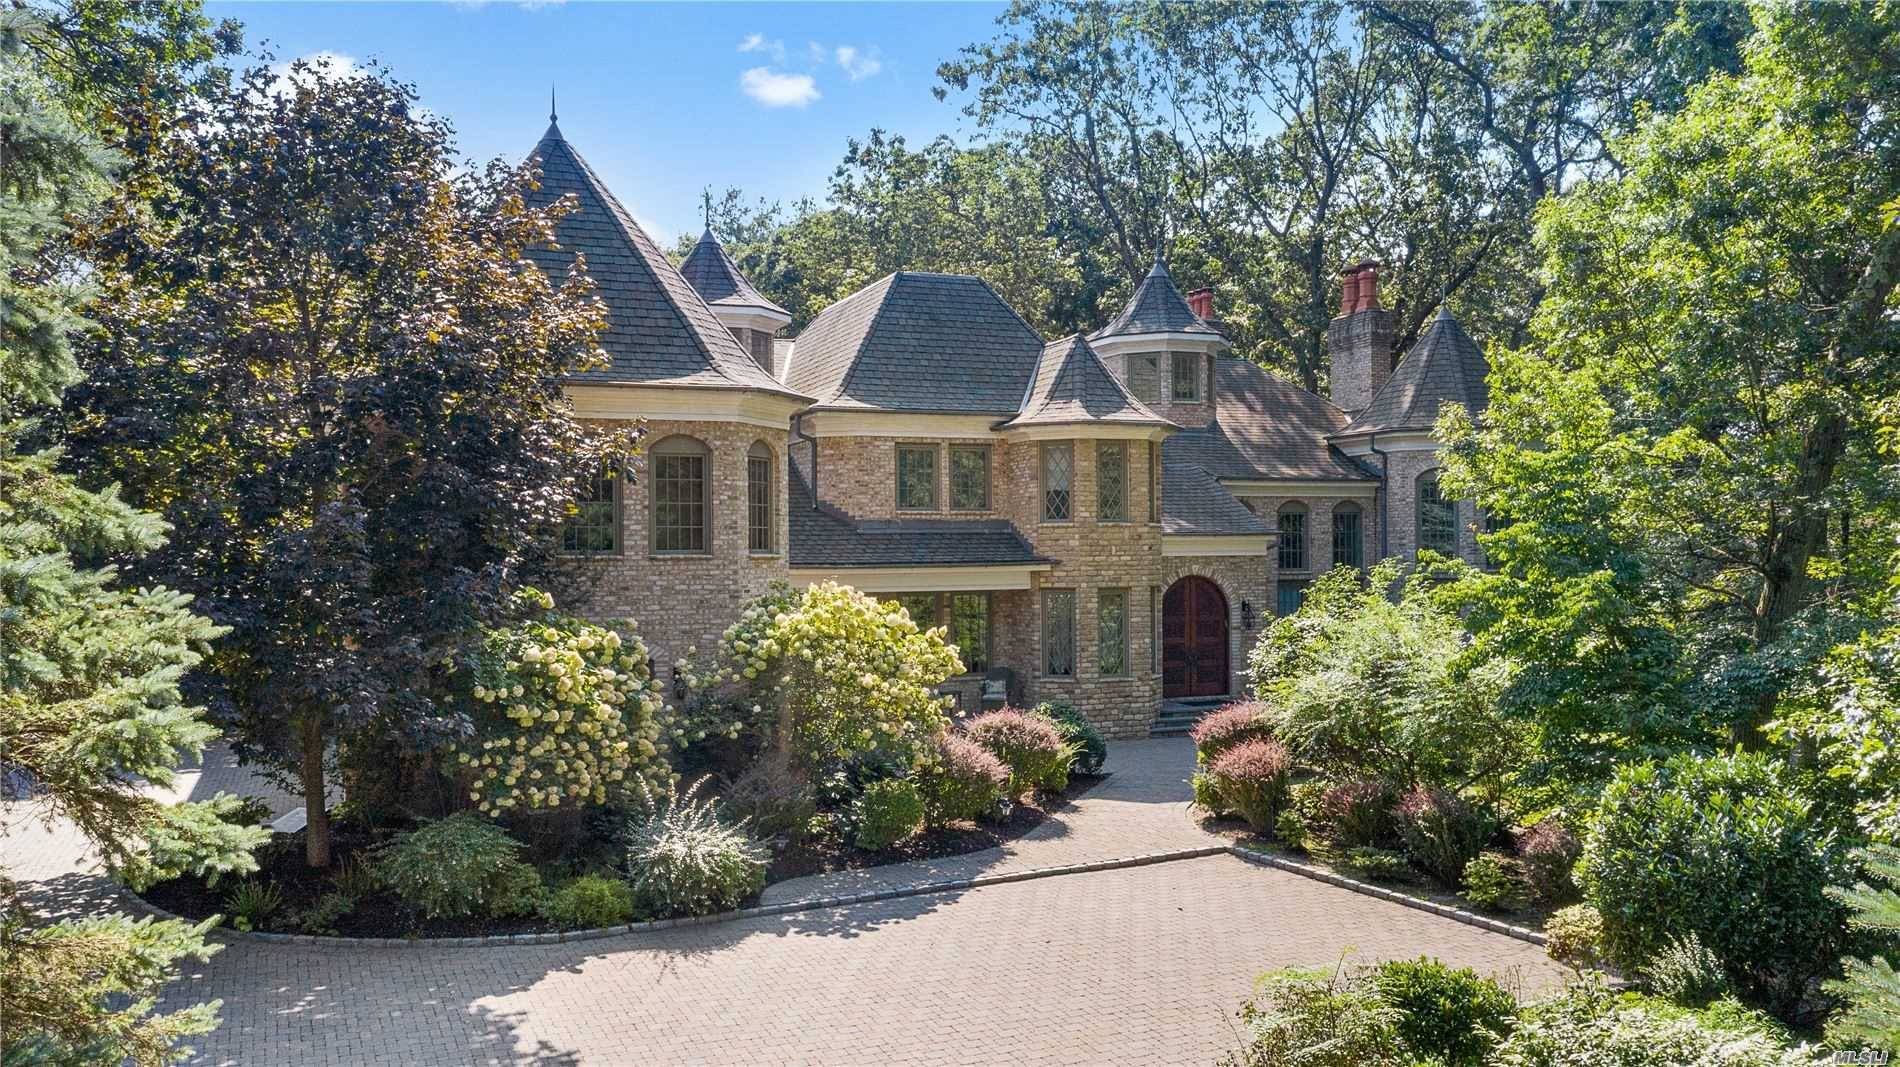 This Exquisite Custom Built Colonial Boasts a Flawless 7500 Sq.